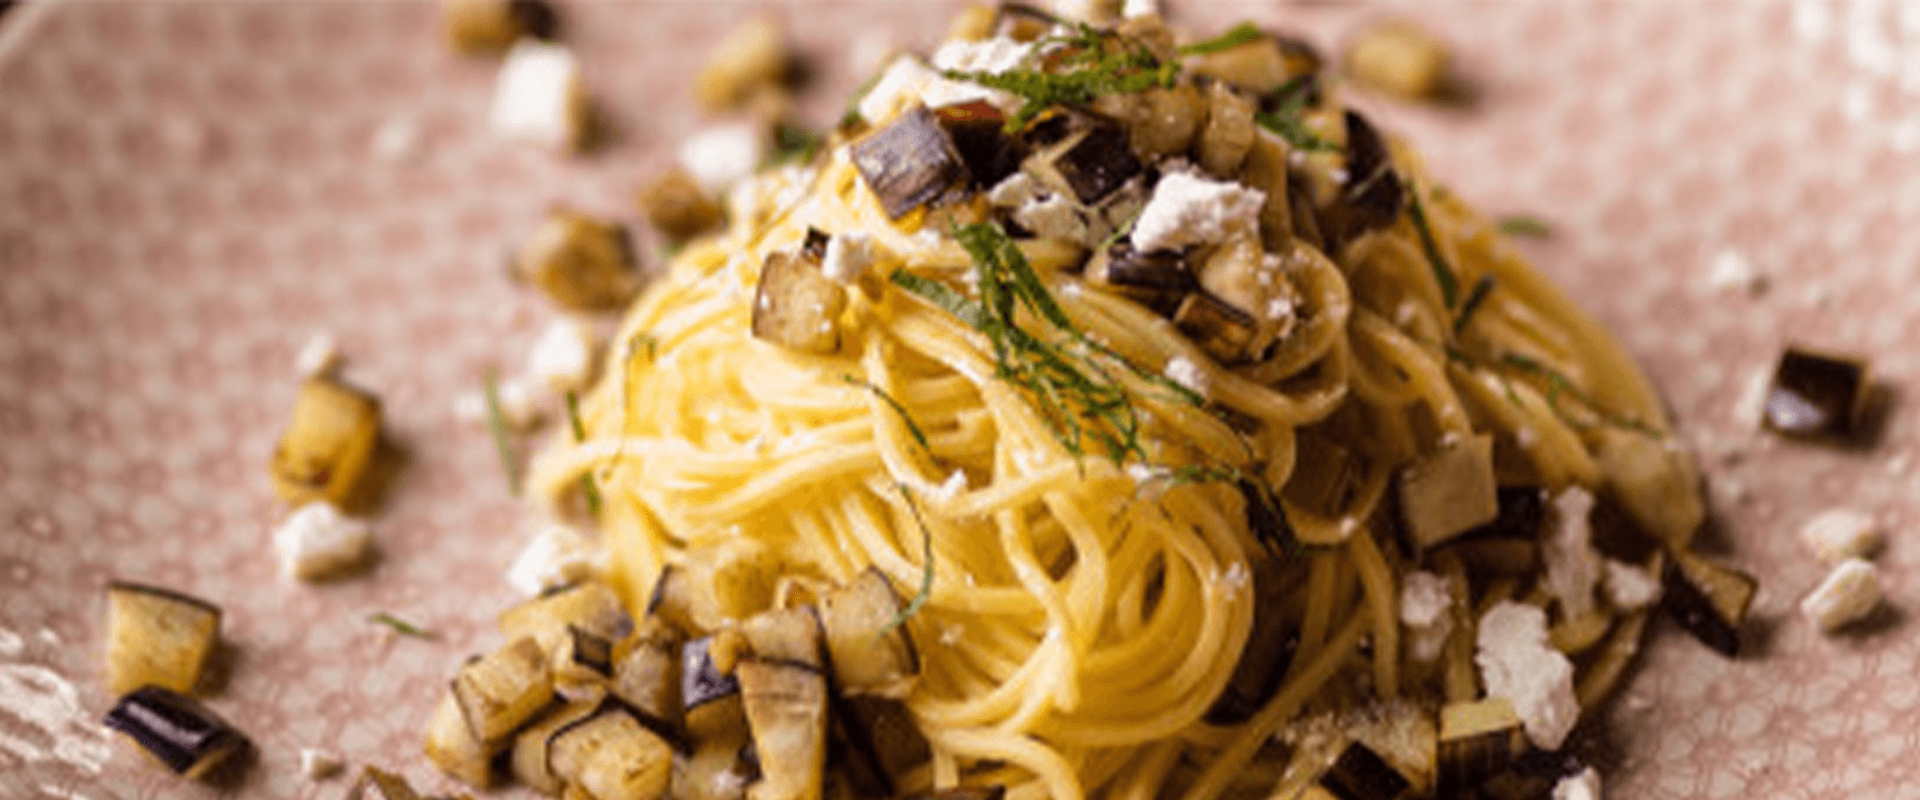 CA_LINGUINE-WITH-EGGPLANT-AND-RICOTTA-SALATA-CHEESE_1920x800.png